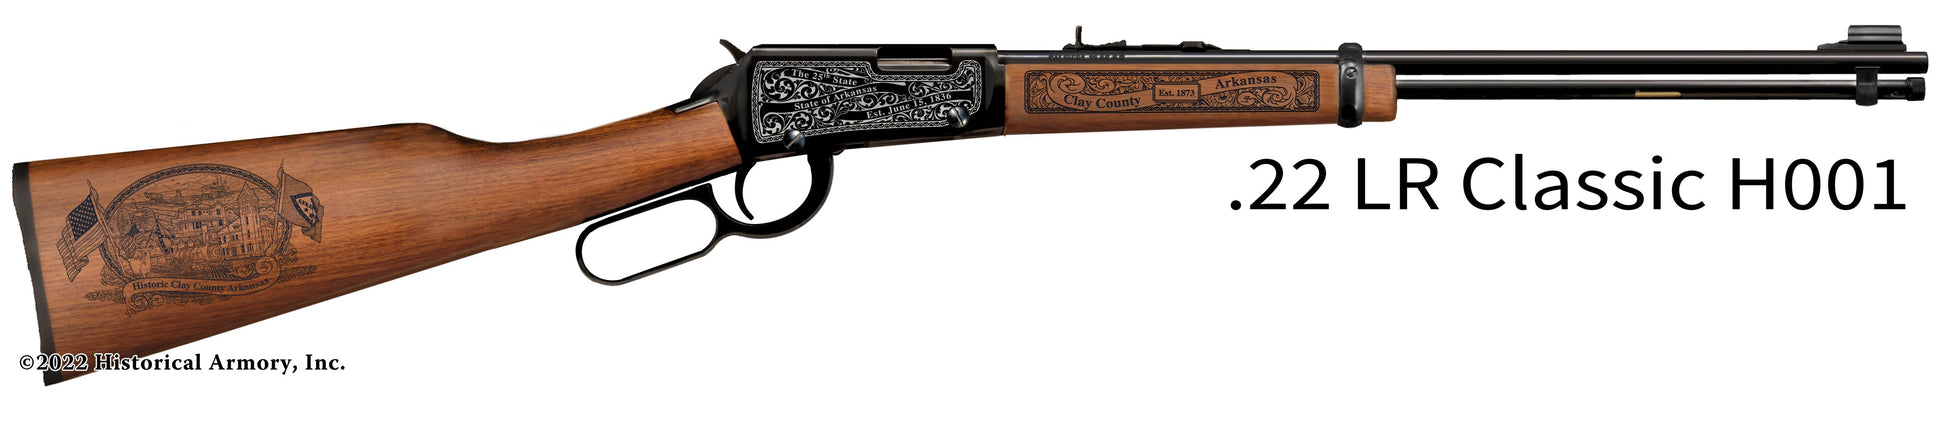 Clay County Arkansas Engraved Henry H001 Rifle